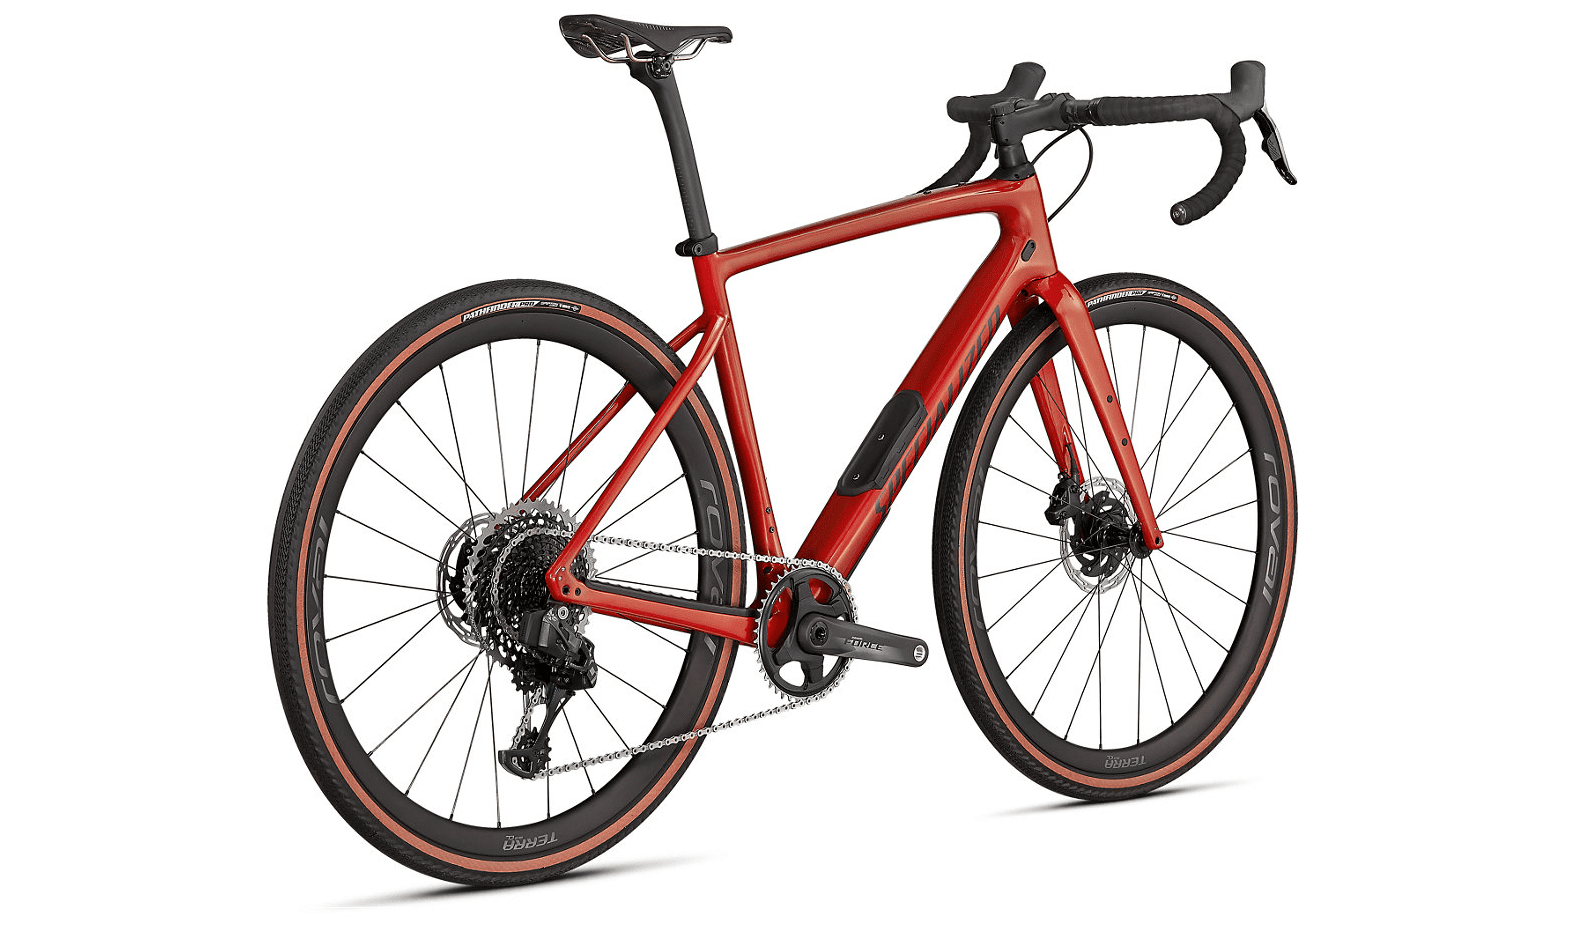 Specialized Diverge Pro Carbon 2021 Seitenansicht in der Farbe Gloss Redwood/Smoke/Chrome/Clean